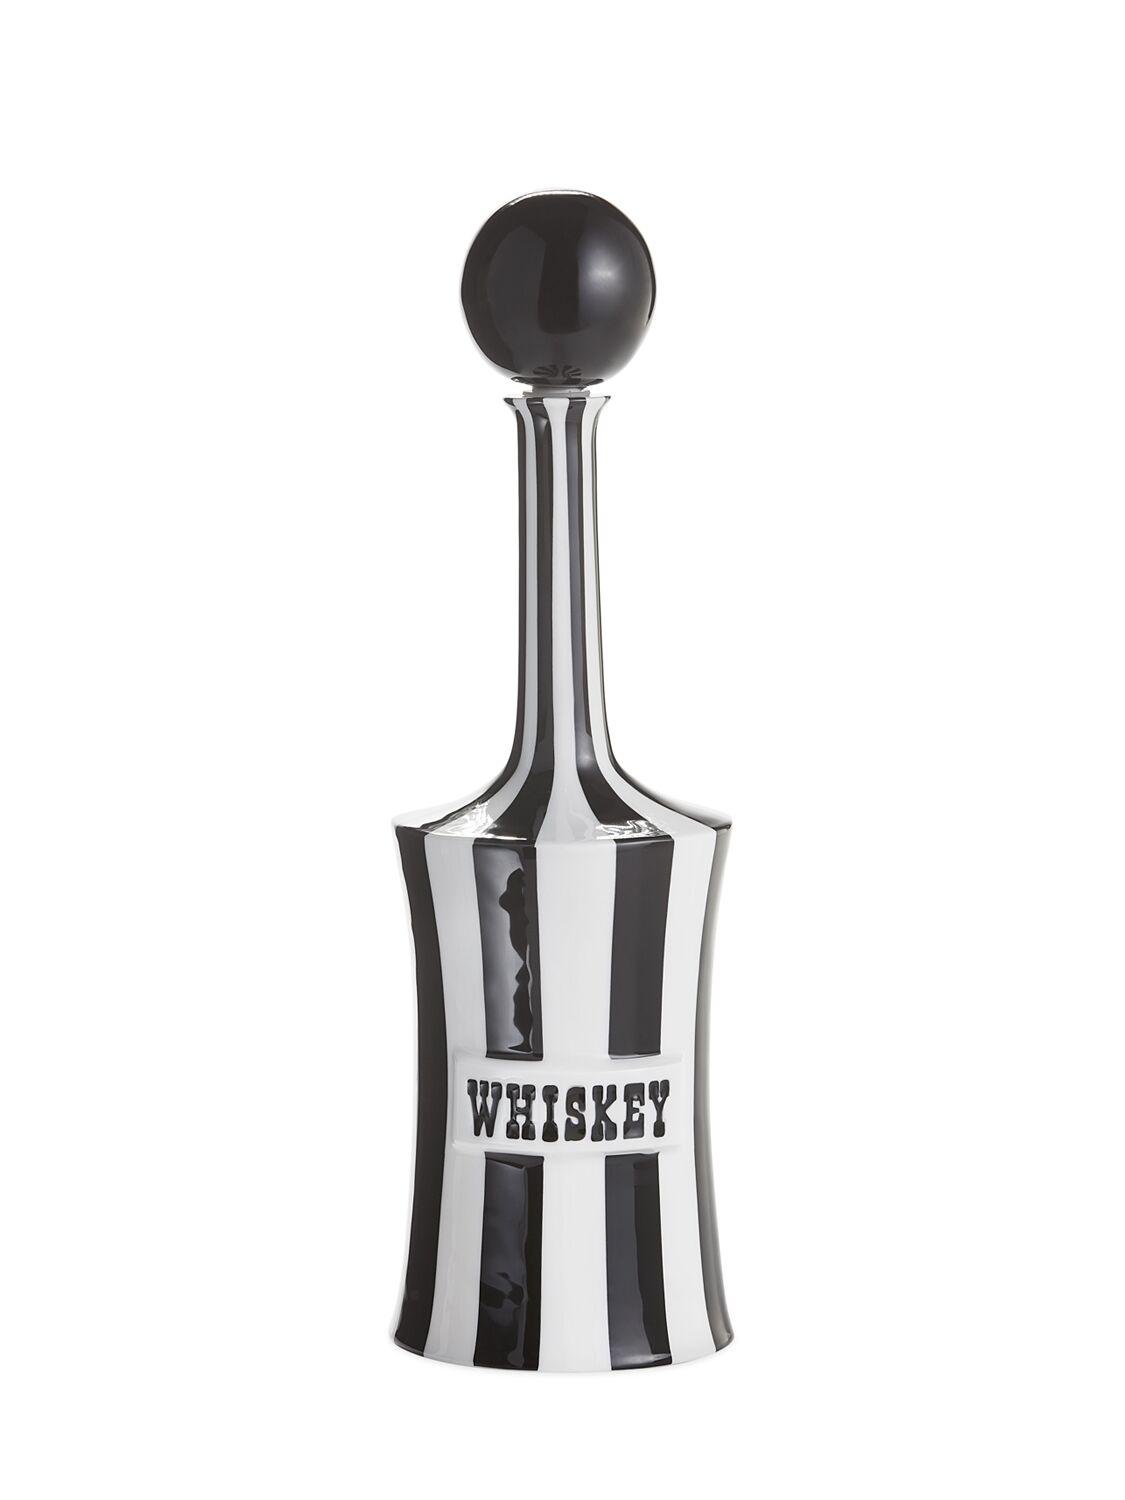 Whiskey Vice Decanter by JONATHAN ADLER